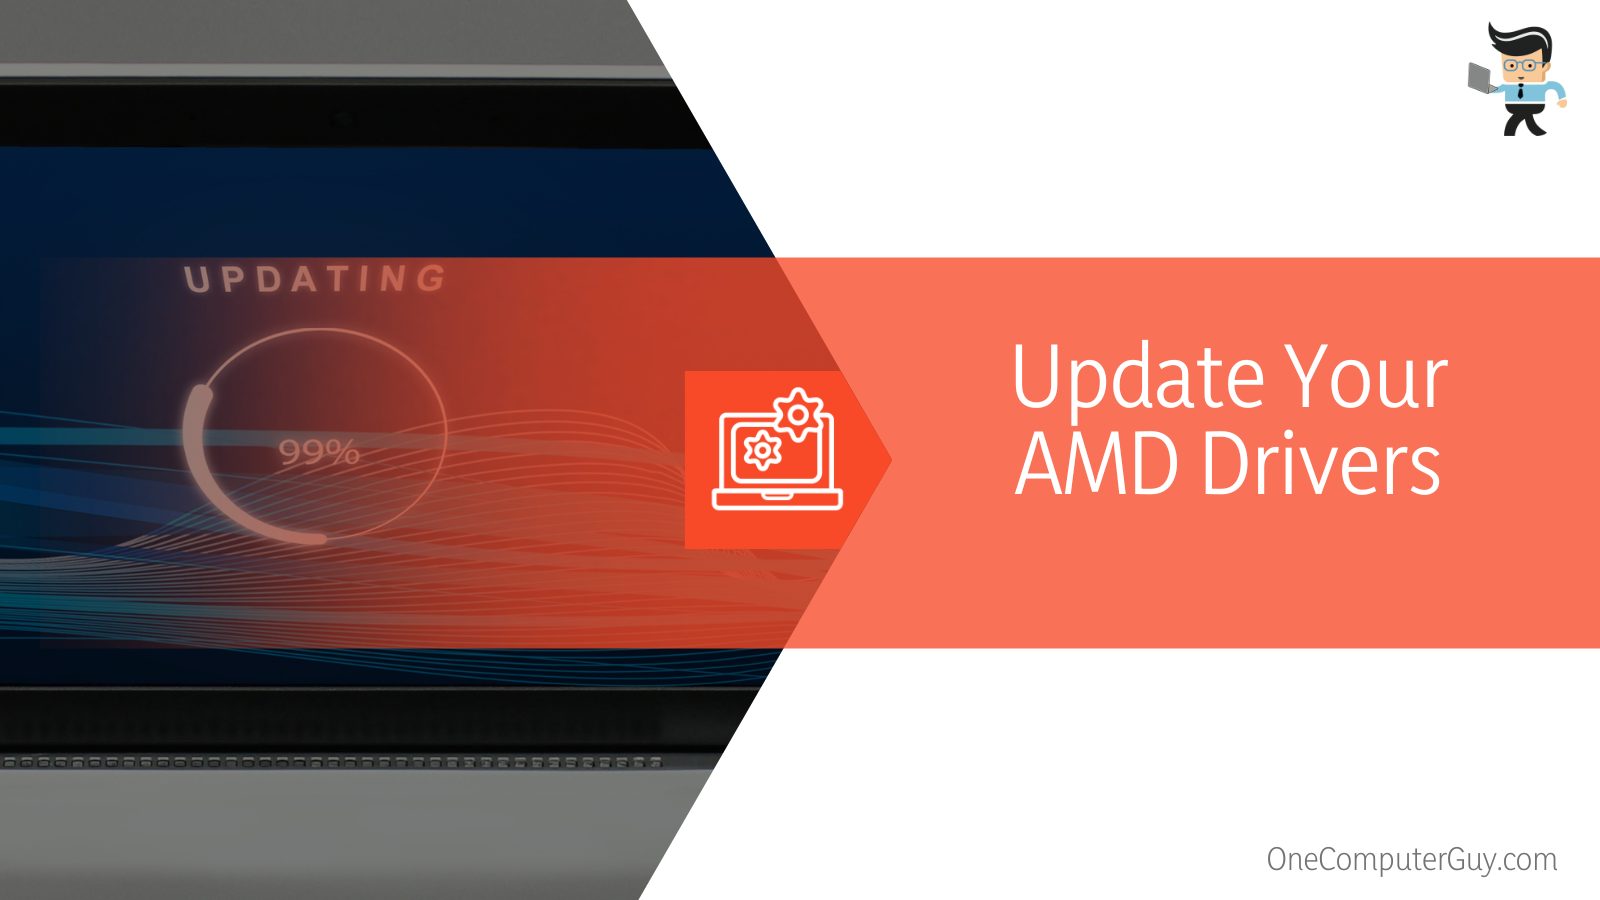 Update Your AMD Drivers